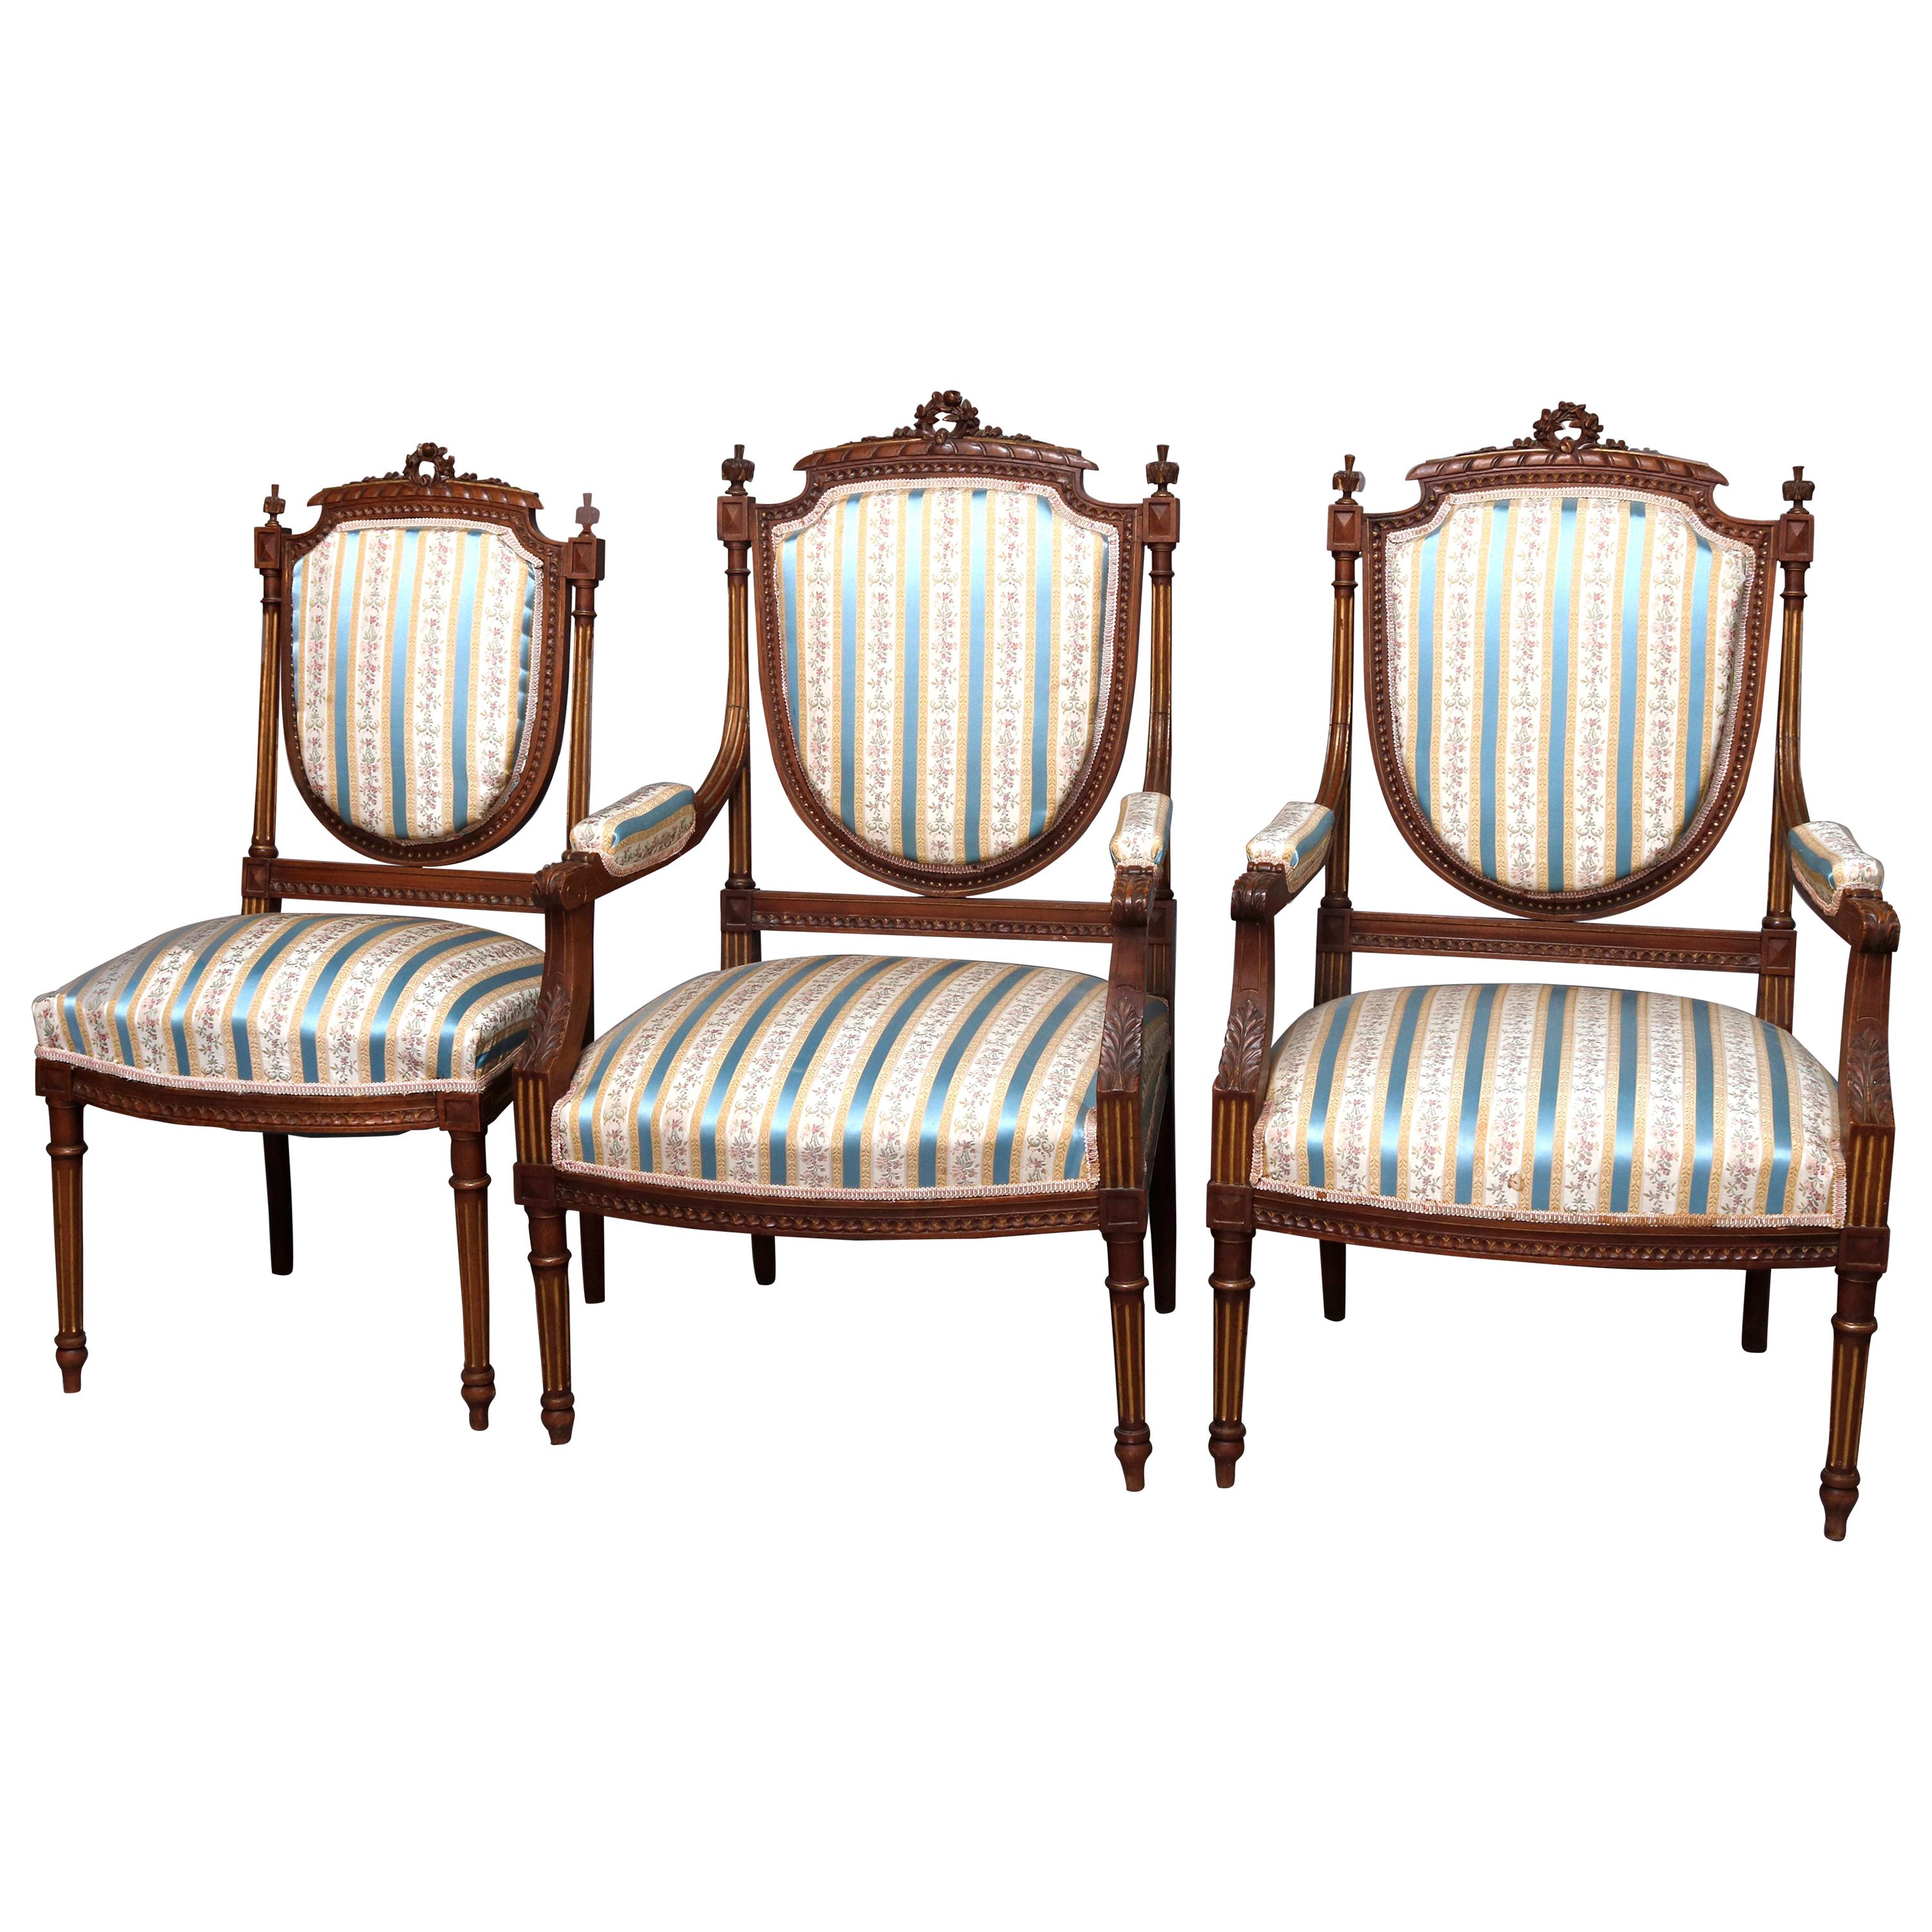 French Louis XVI Style Parcel-Gilt Carved Walnut Parlor Set, 19th Century